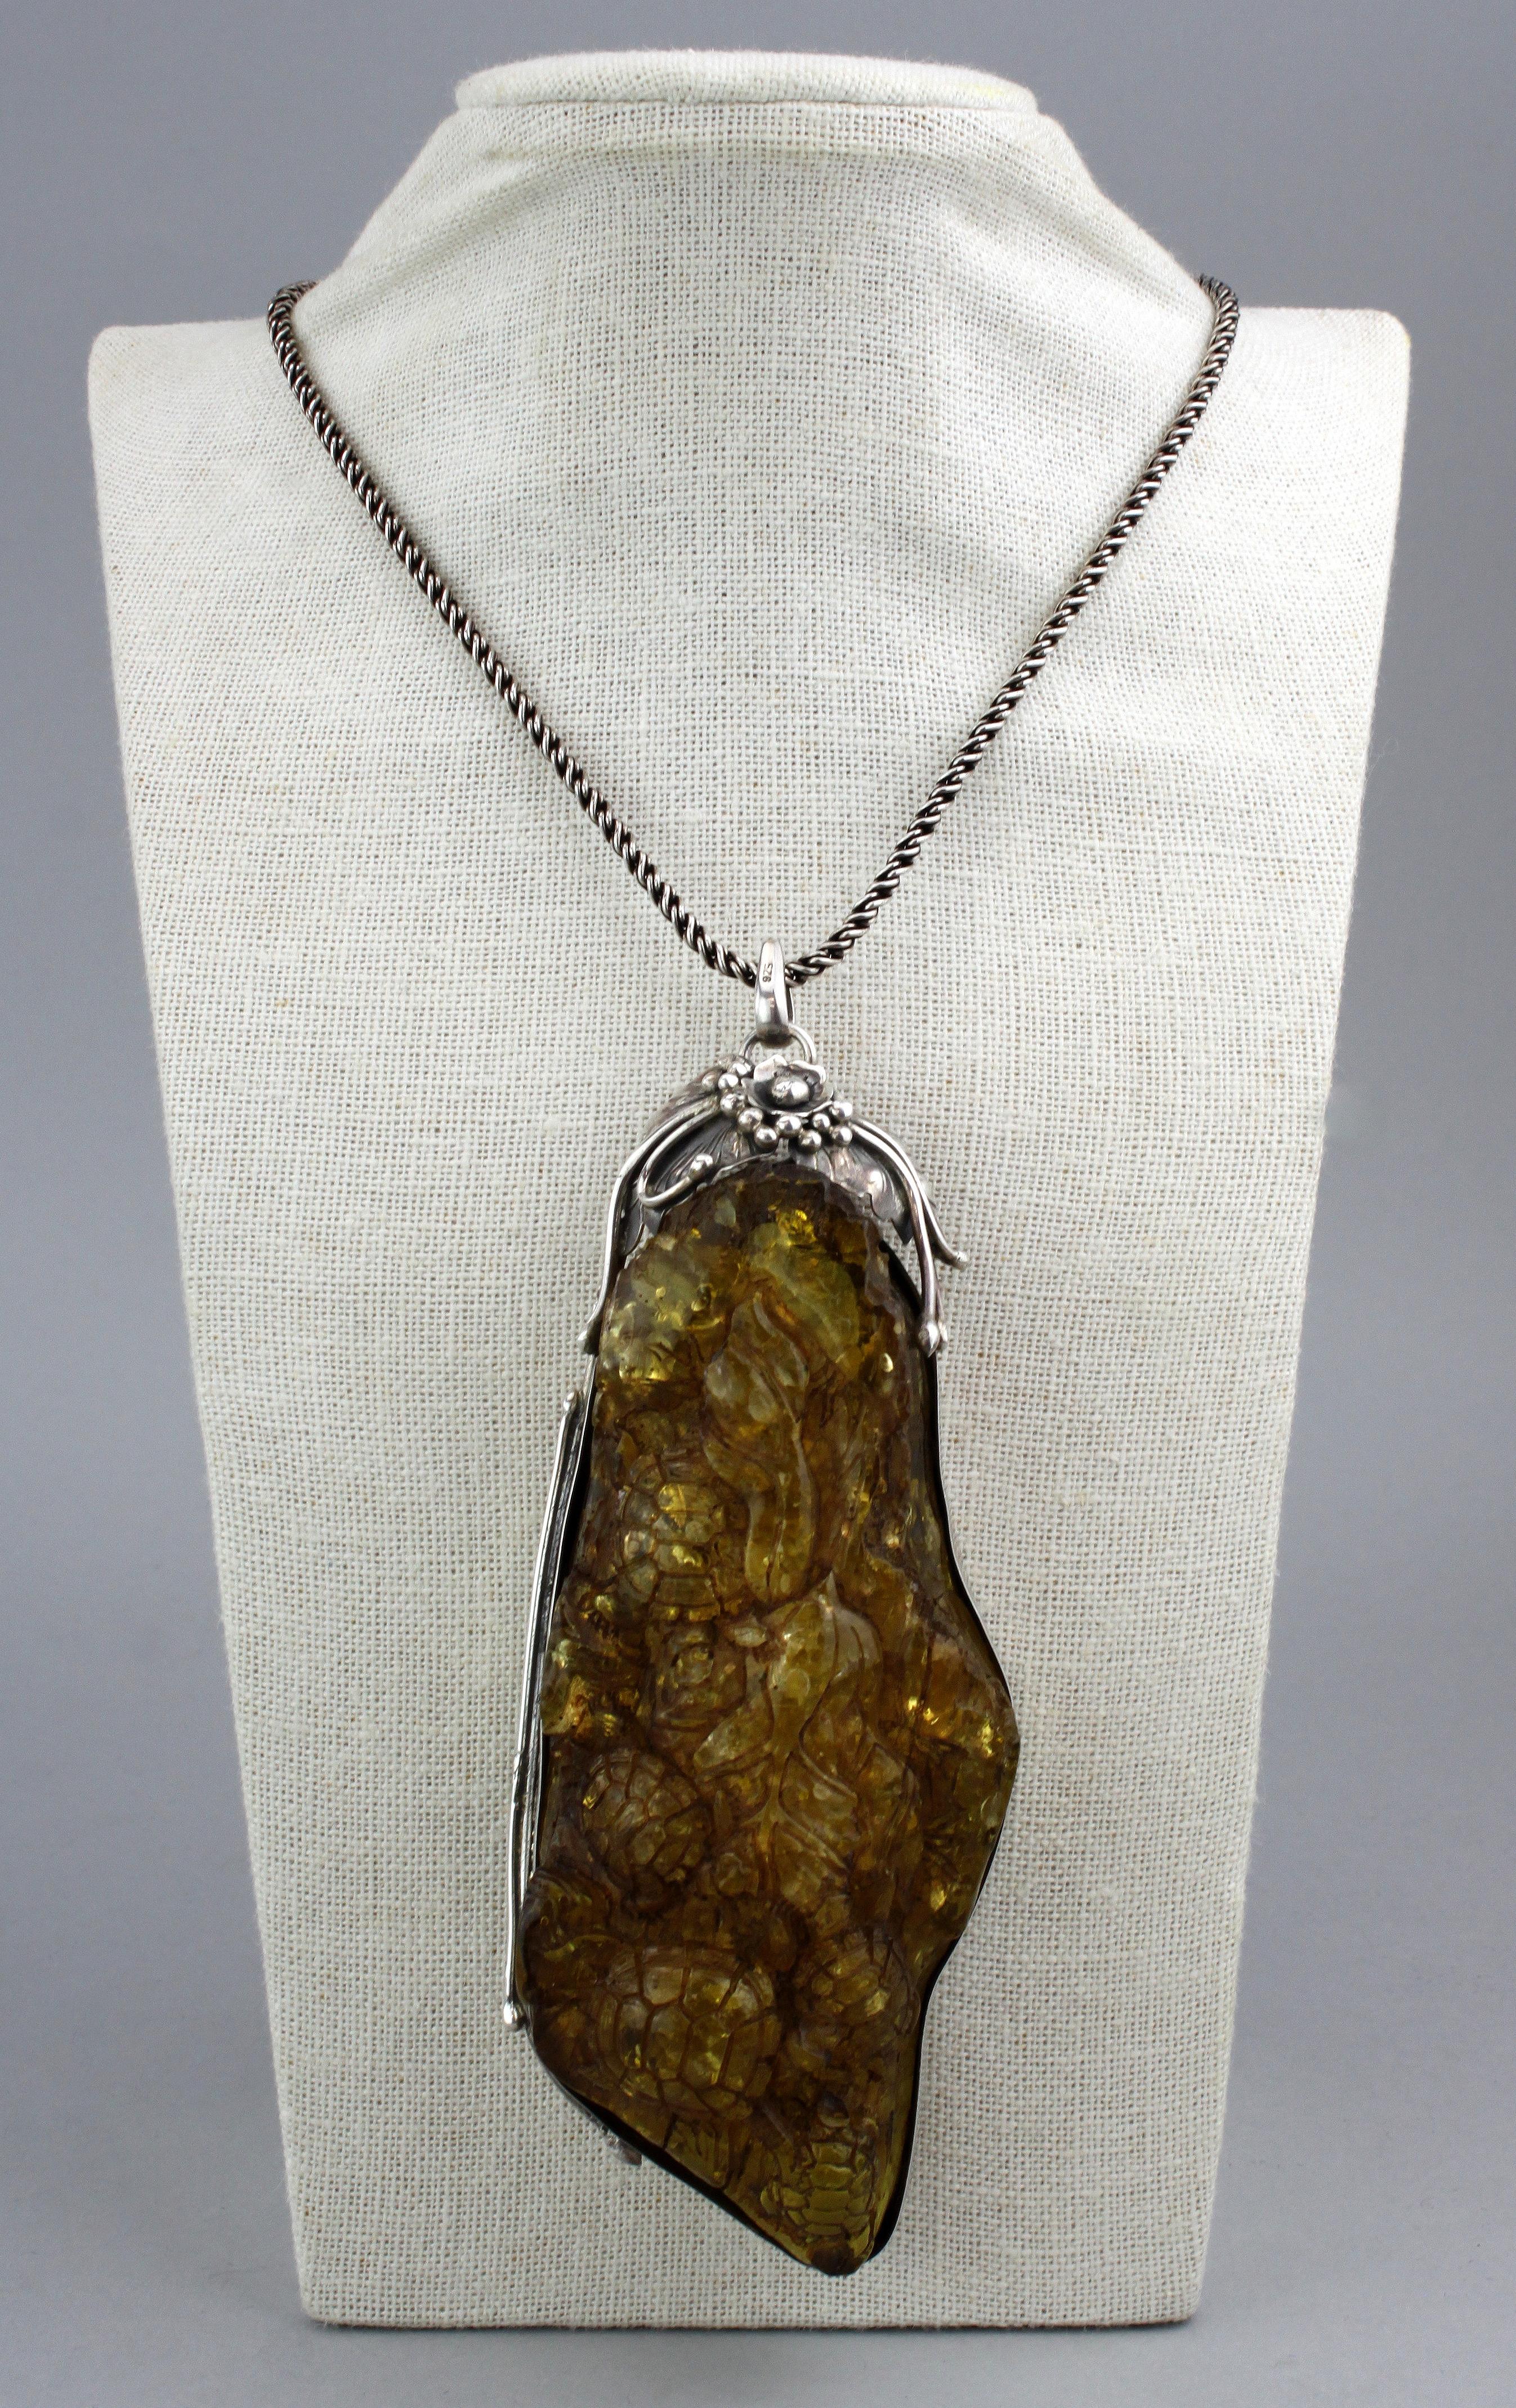 Antique sterling silver and amber carving pendant necklace, from St Petersburg, Russia.
Hallmarked 925
Made in Russia, St. Petersburg 1892.
Stamped St. Petersburg 1892.

Dimensions -
Length : 79.5 cm
Necklace Width : 0.4 cm
Pendant / Carving Size :